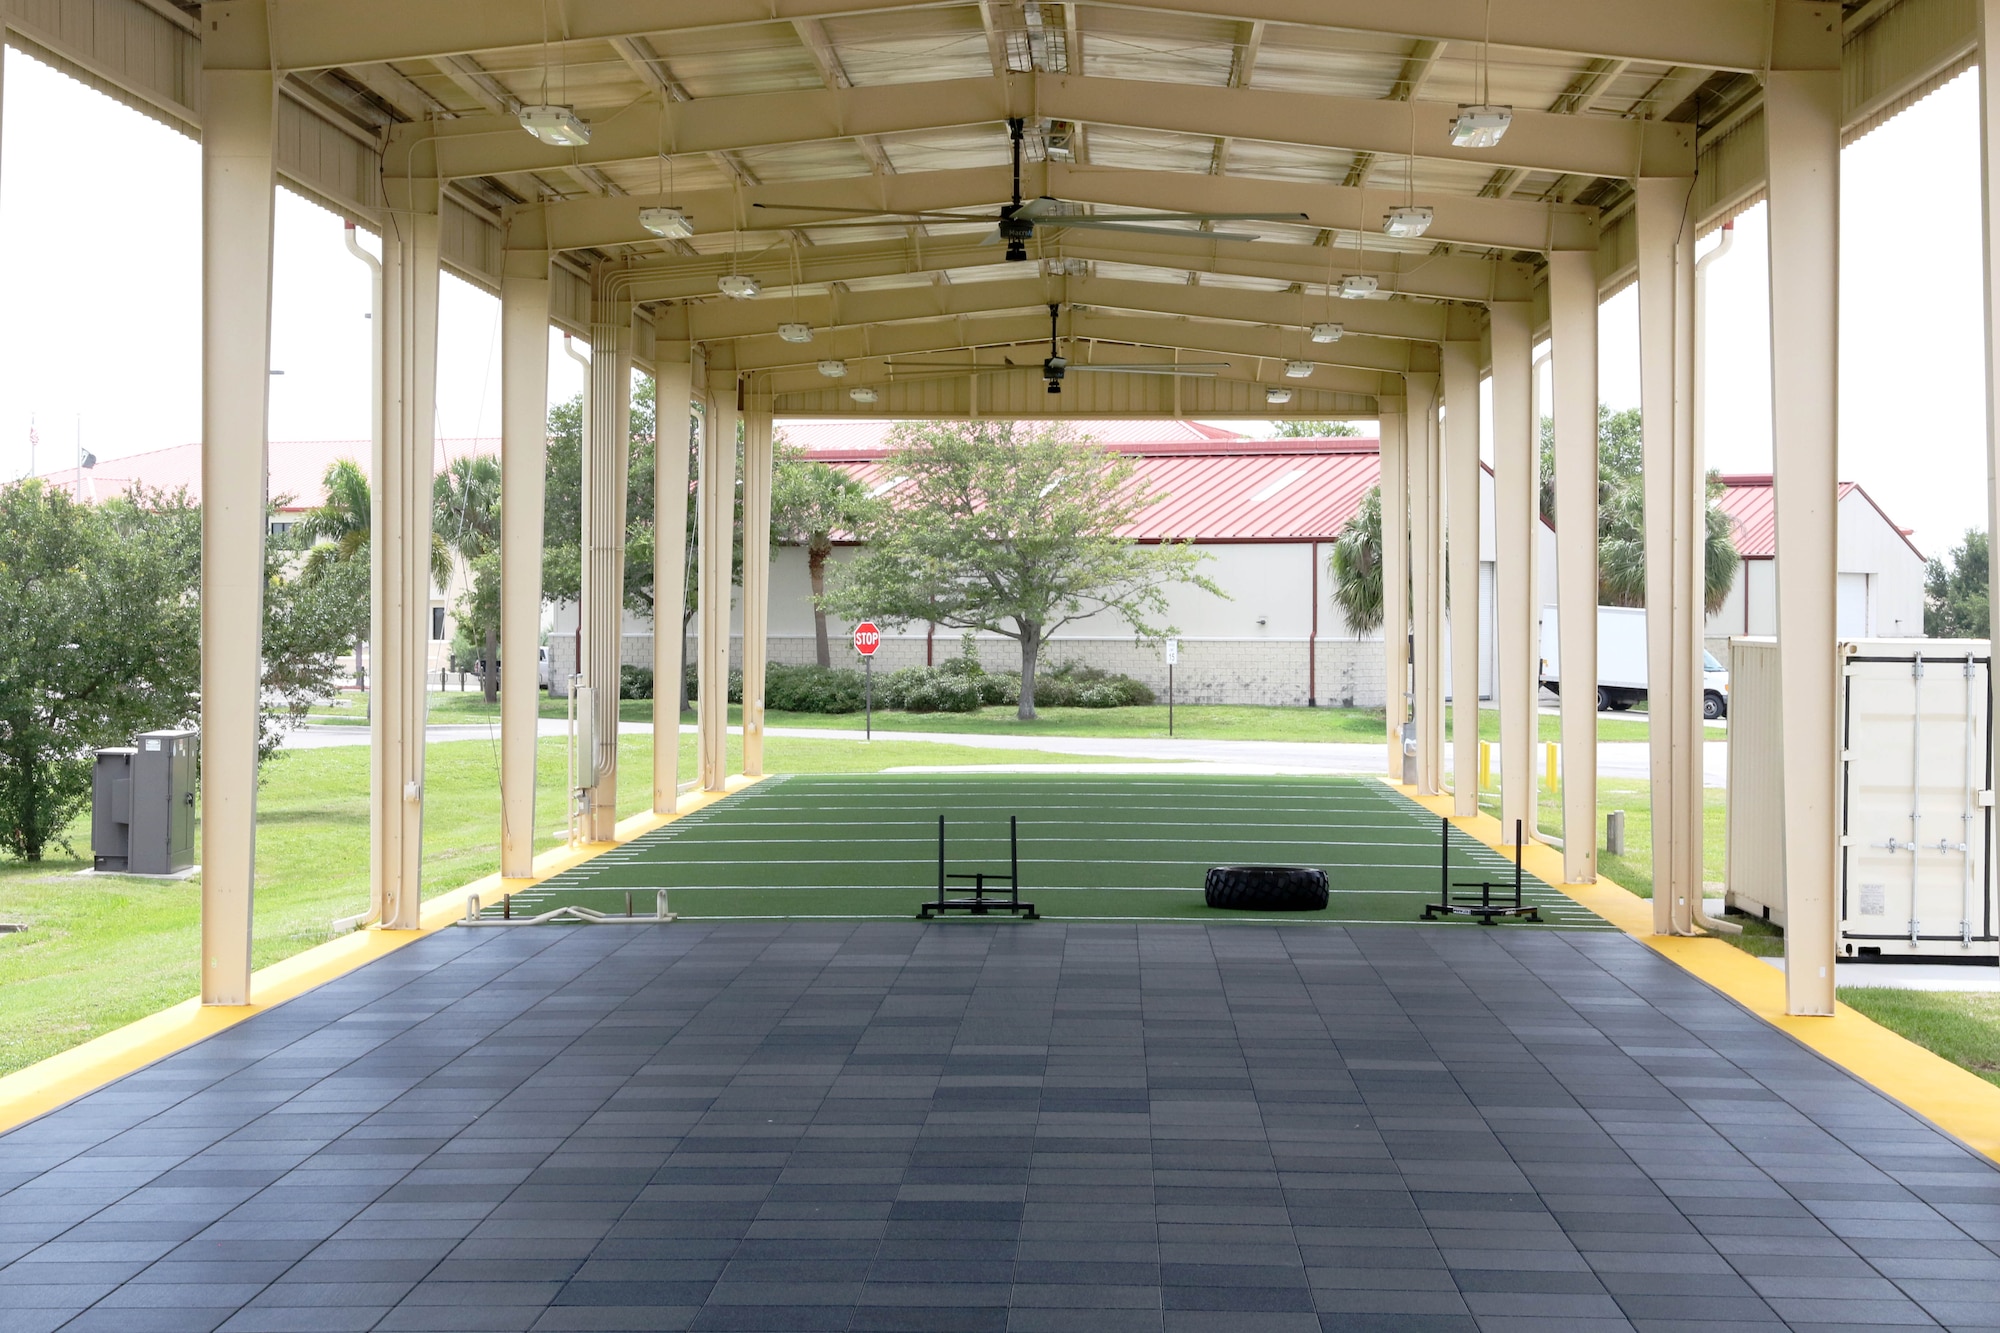 The new U.S. Special Operations Command Central human performance outdoor facility was dedicated at MacDill Air Force Base, Tampa, Florida, June 3, 2020.